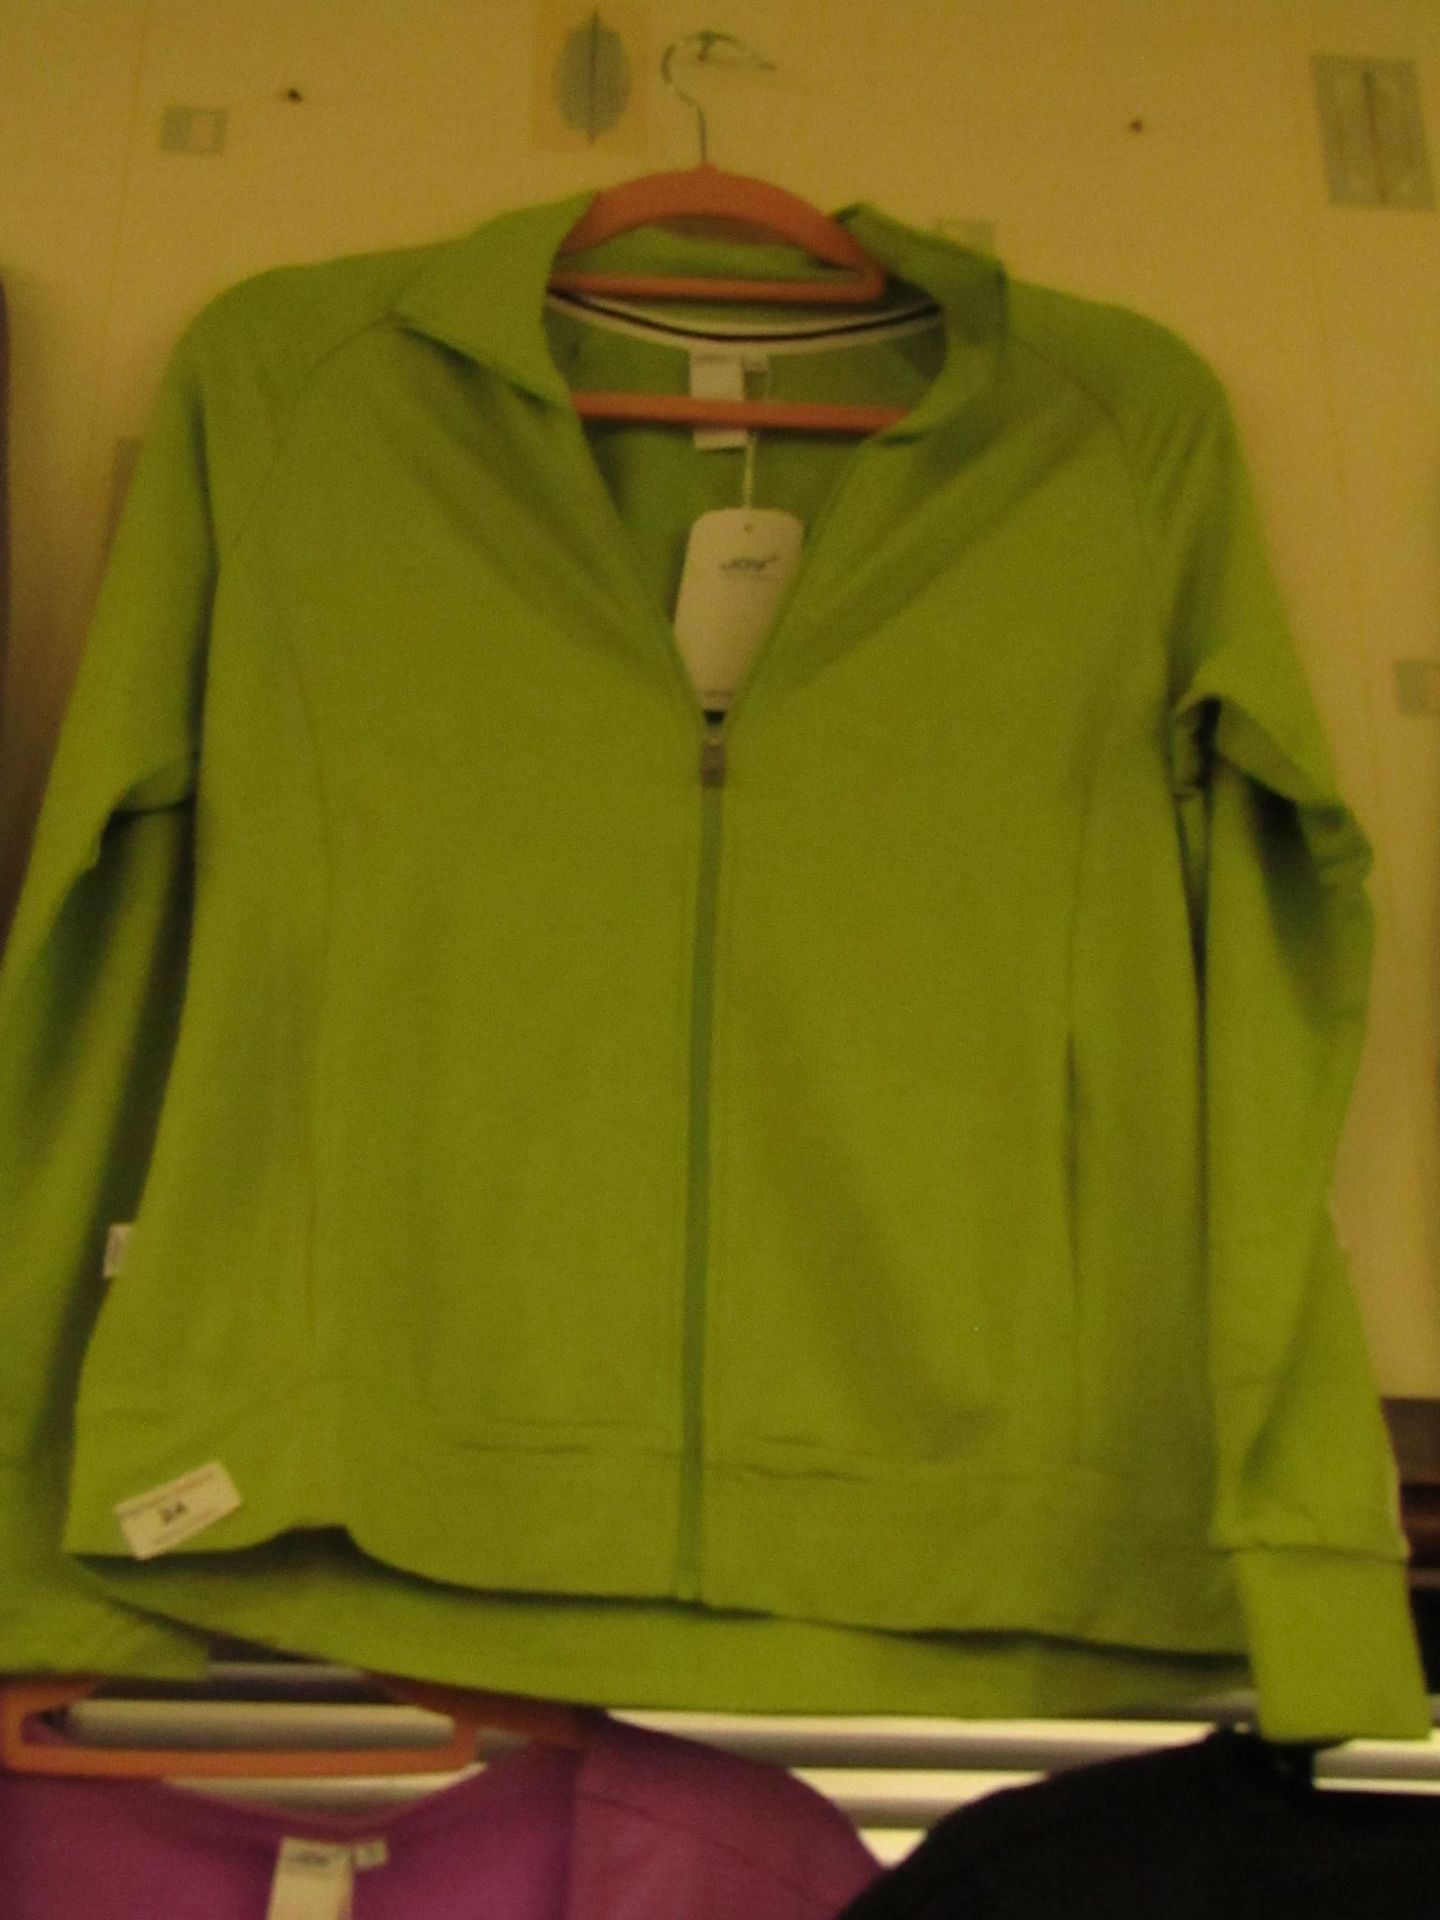 1 x Joy Sportswear Jacket size 38 new with tag see image for design